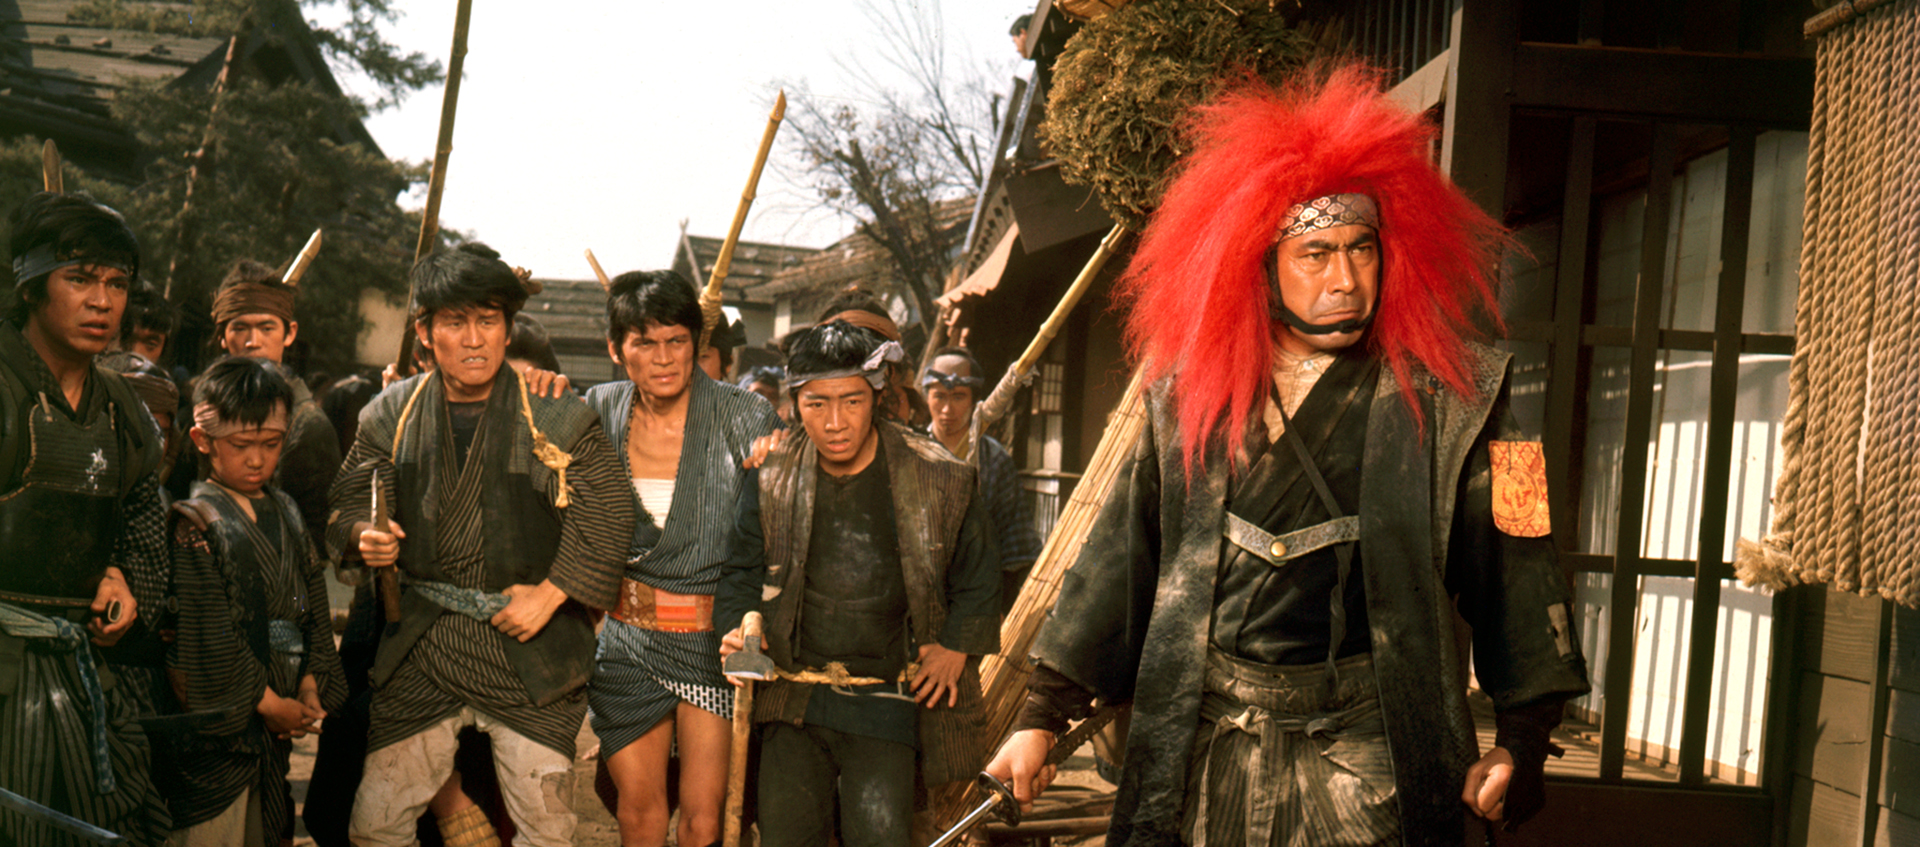 Still of a group of people of ranging ages carrying staffs as weapons; they are led by the person in front of them wearing a red lion’s main and patterned headband, holding a sword.